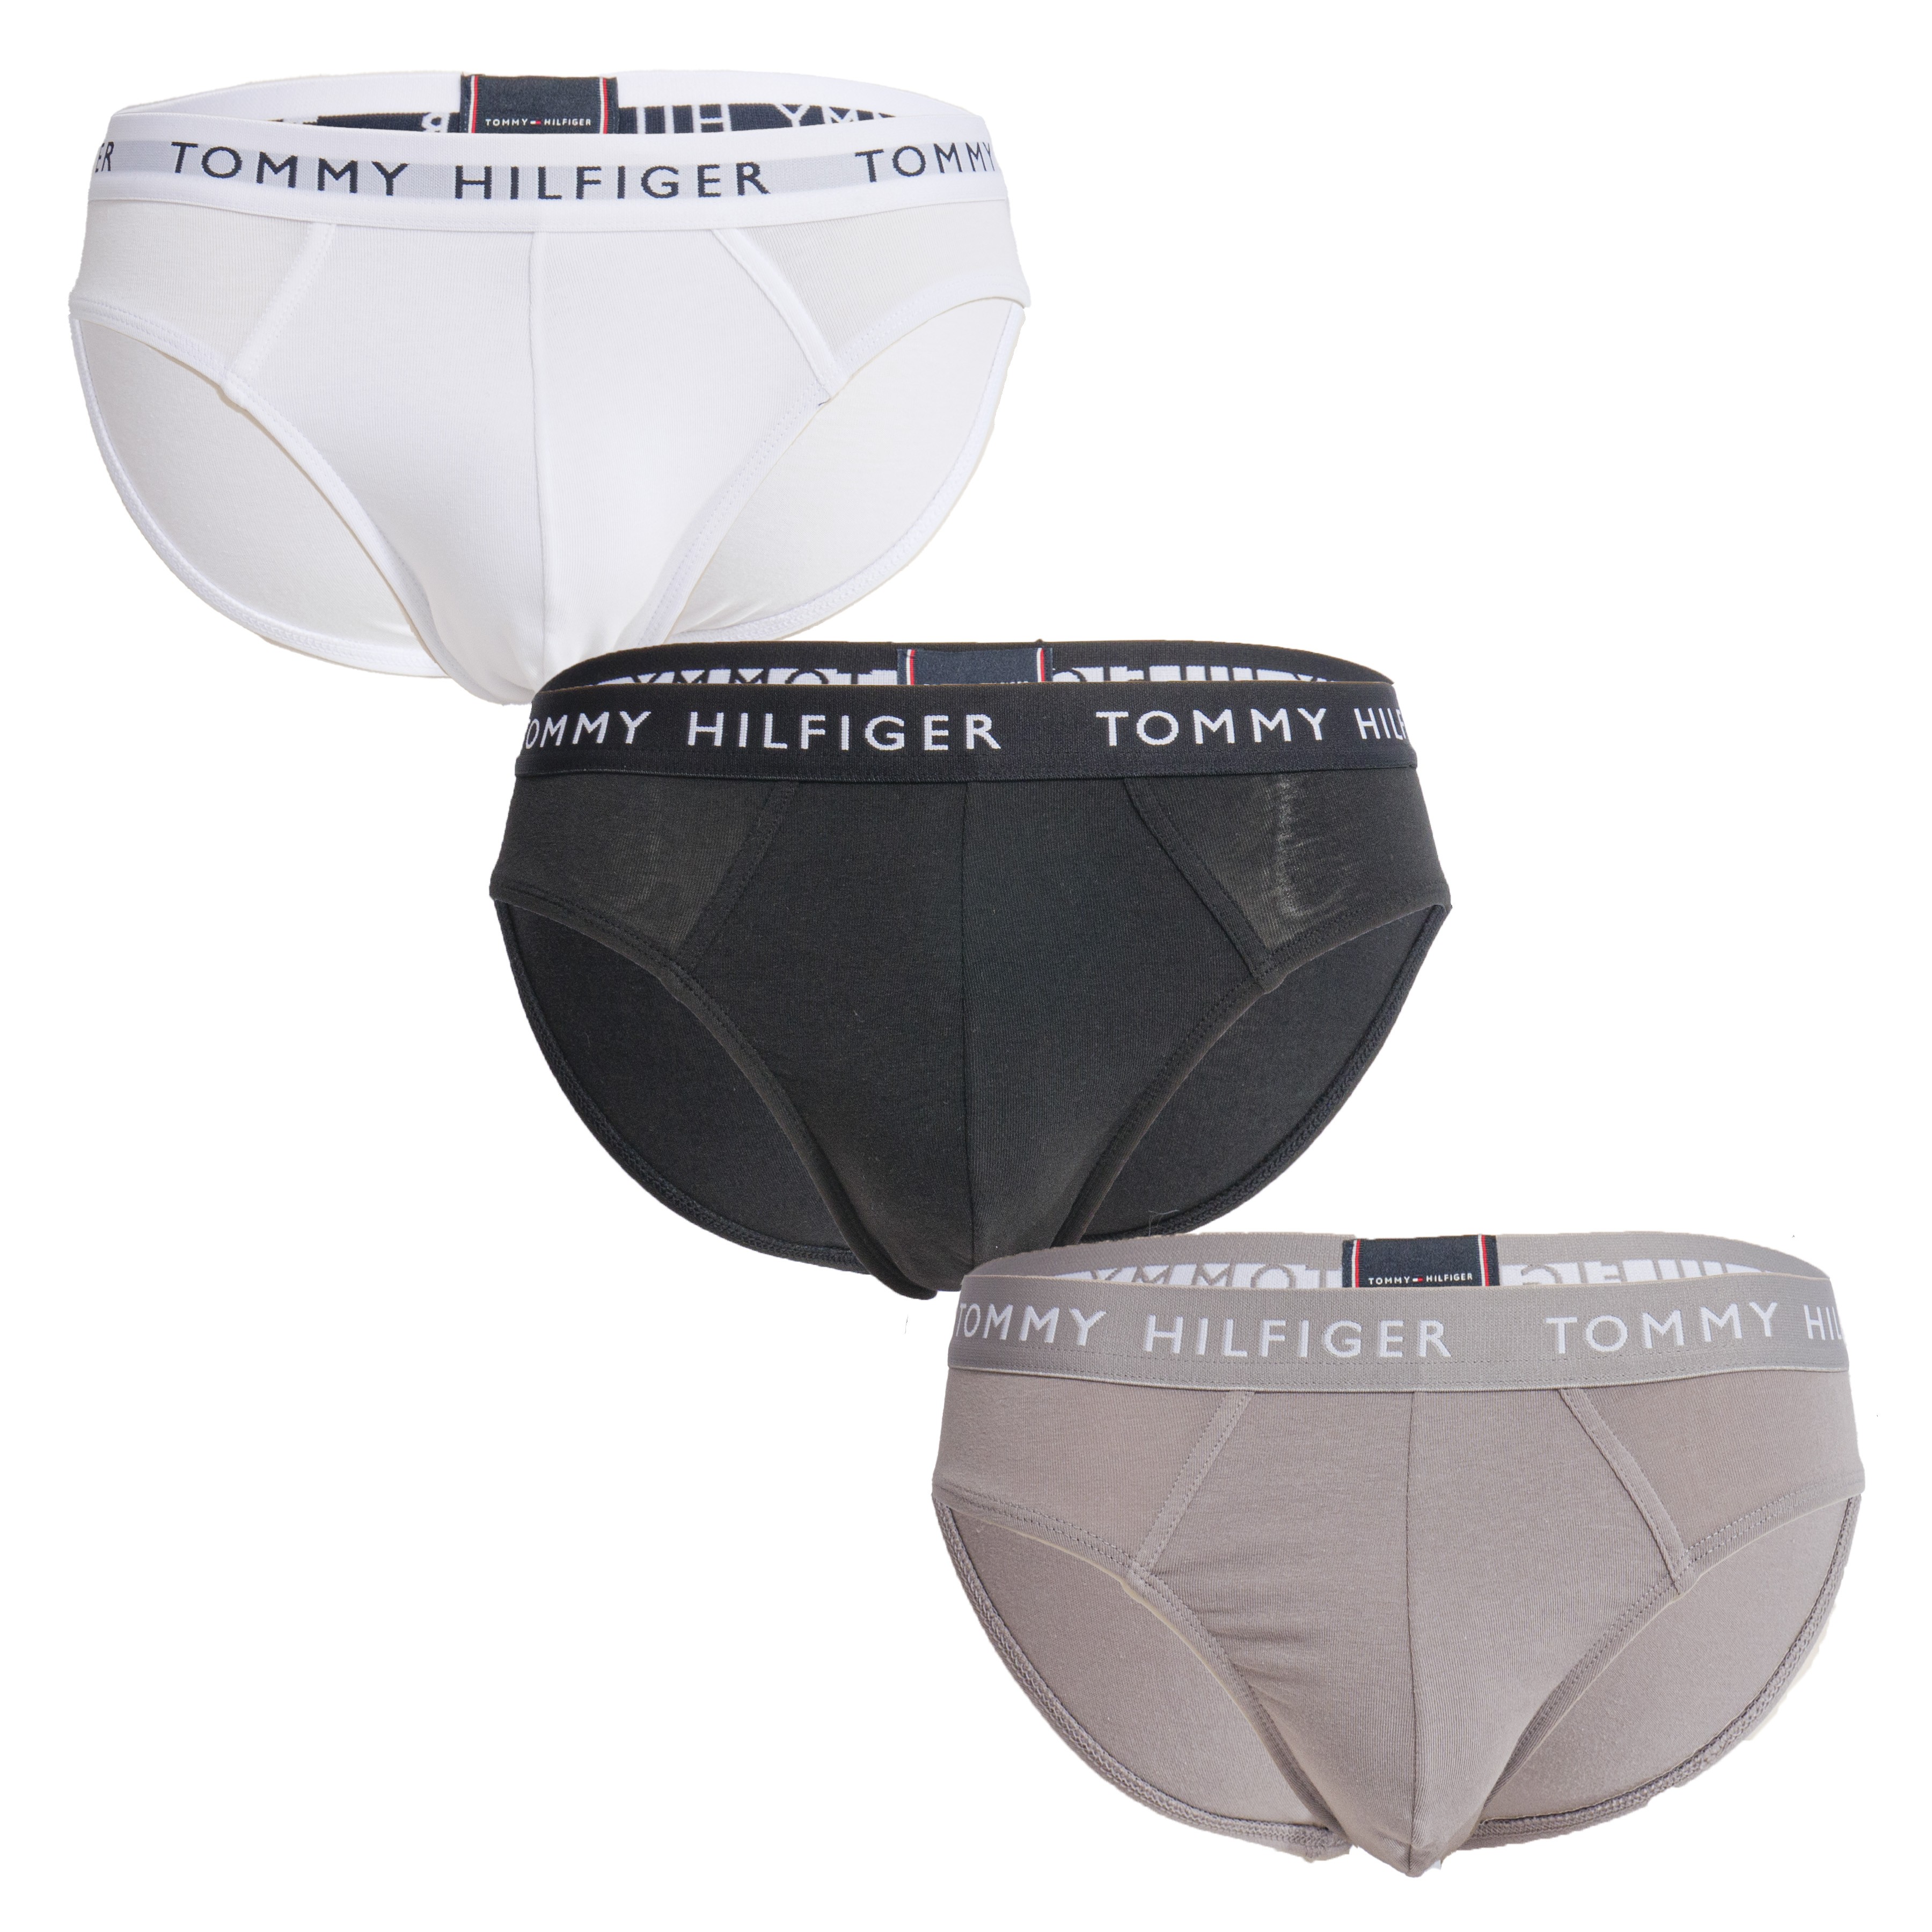 3 Tommy briefs - black, grey white: Packs for ma...